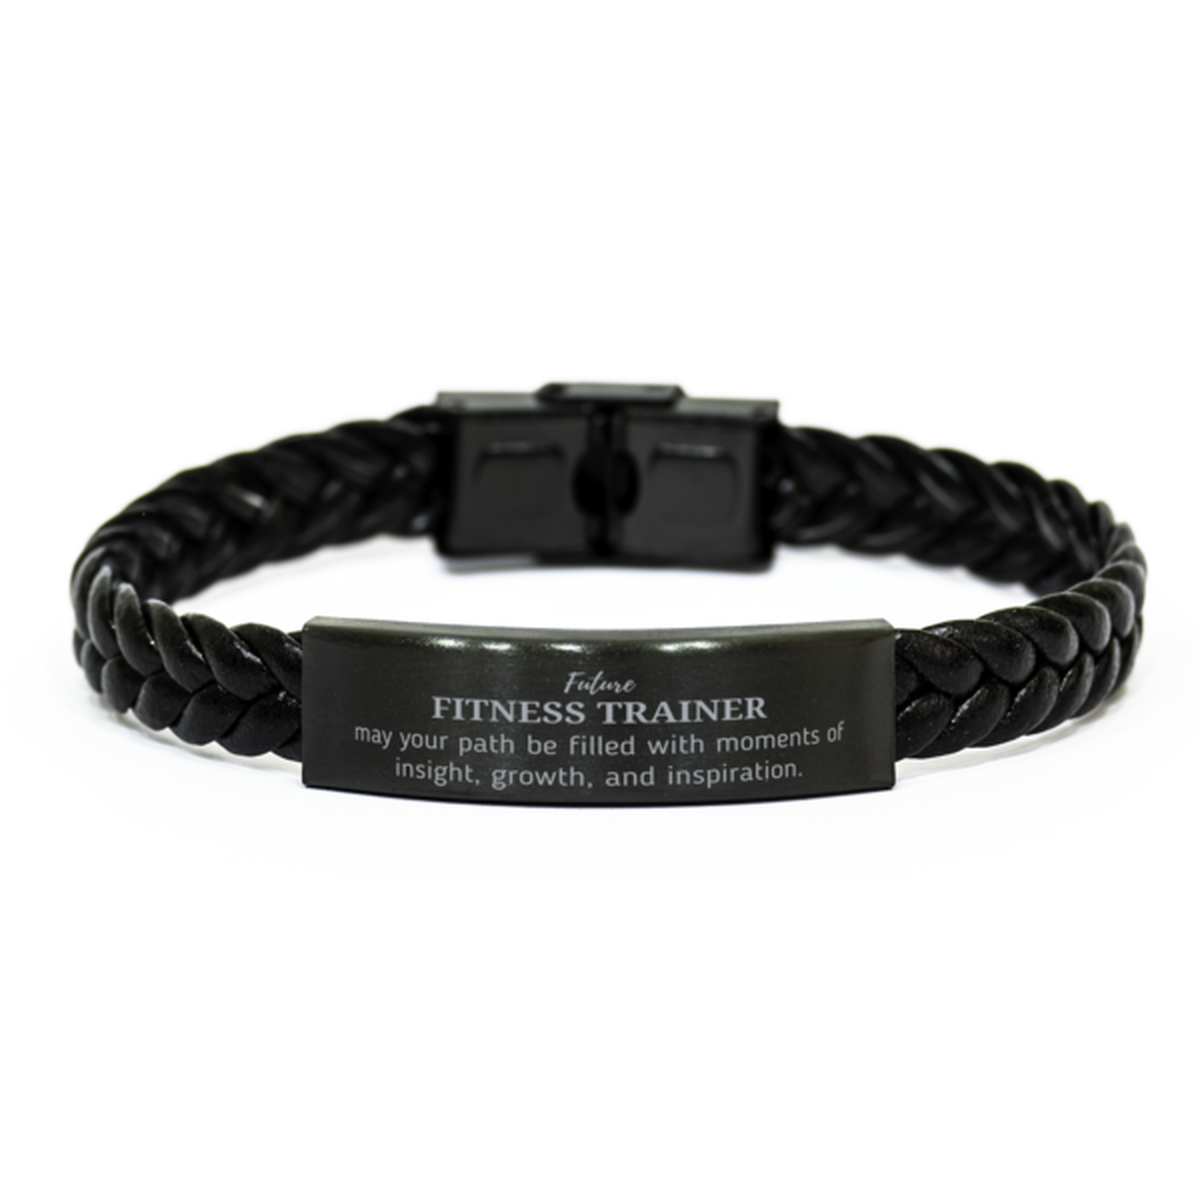 Future Fitness Trainer Gifts, May your path be filled with moments of insight, Graduation Gifts for New Fitness Trainer, Christmas Unique Braided Leather Bracelet For Men, Women, Friends